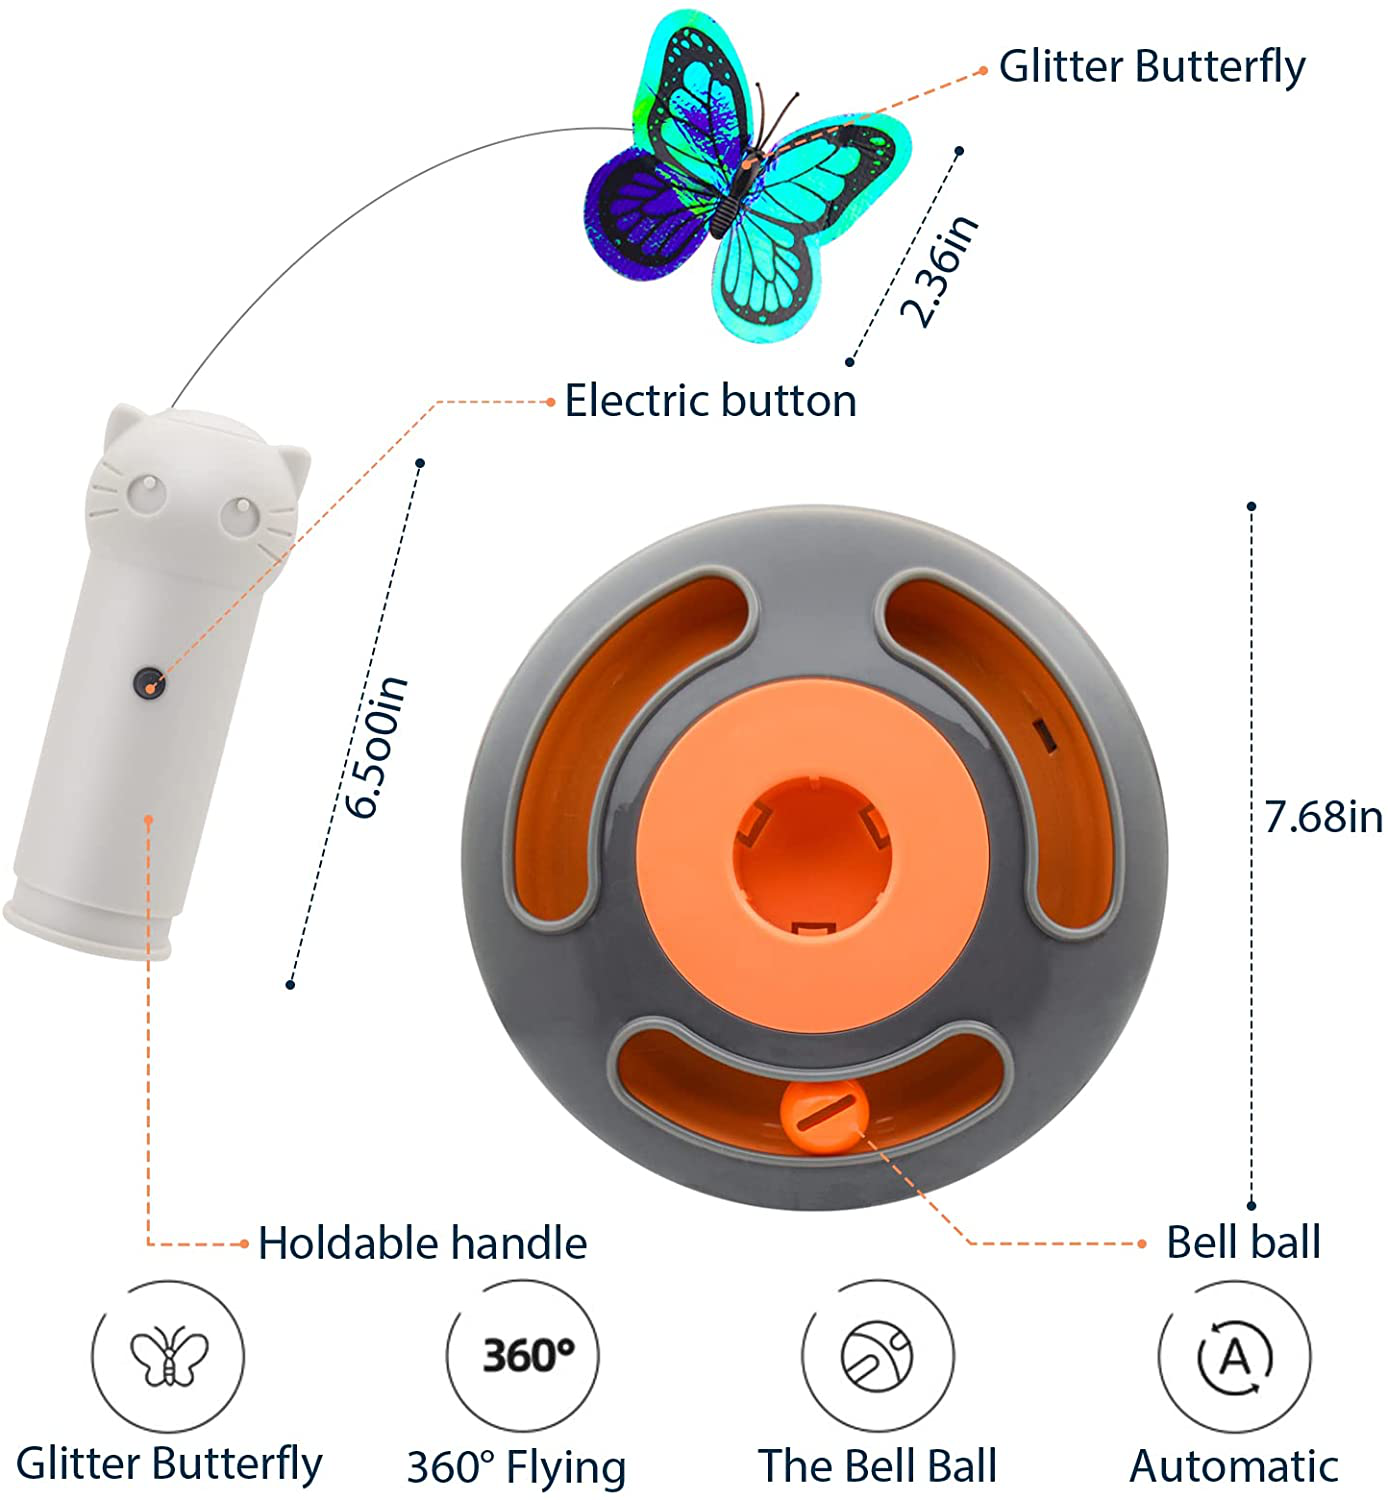 LUKYY Interactive Cat Toys - Automatic Electric Rotating Butterfly & Ball Exercise Kitten Toy,Funny Cat Teaser Toys for Indoor Cats Animals & Pet Supplies > Pet Supplies > Cat Supplies > Cat Toys E-LONG INDUSTRIAL   